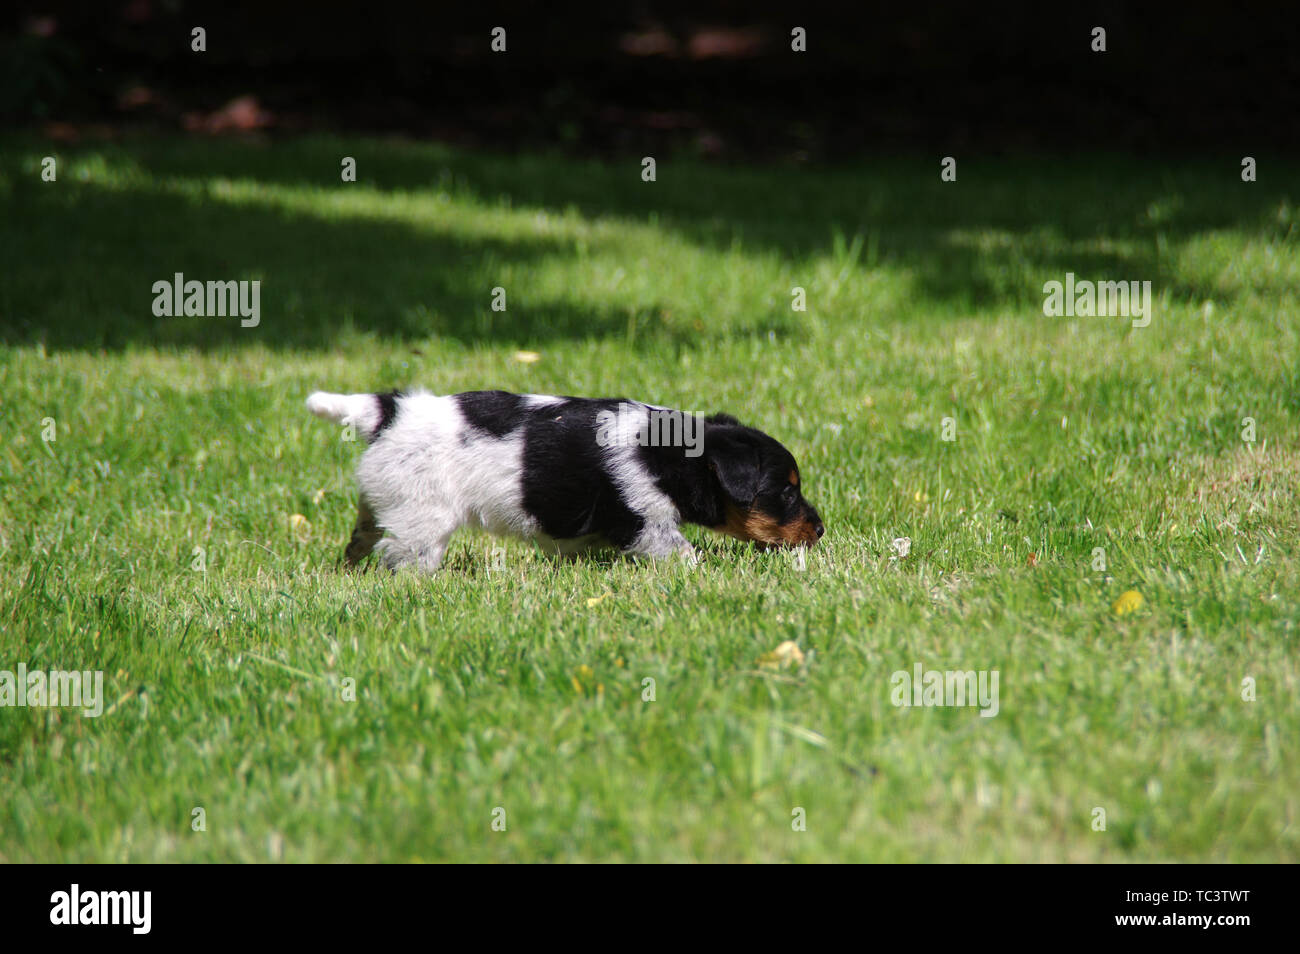 The puppy is walking on the grass. The little dog gets to know the world with curiosity. Stock Photo